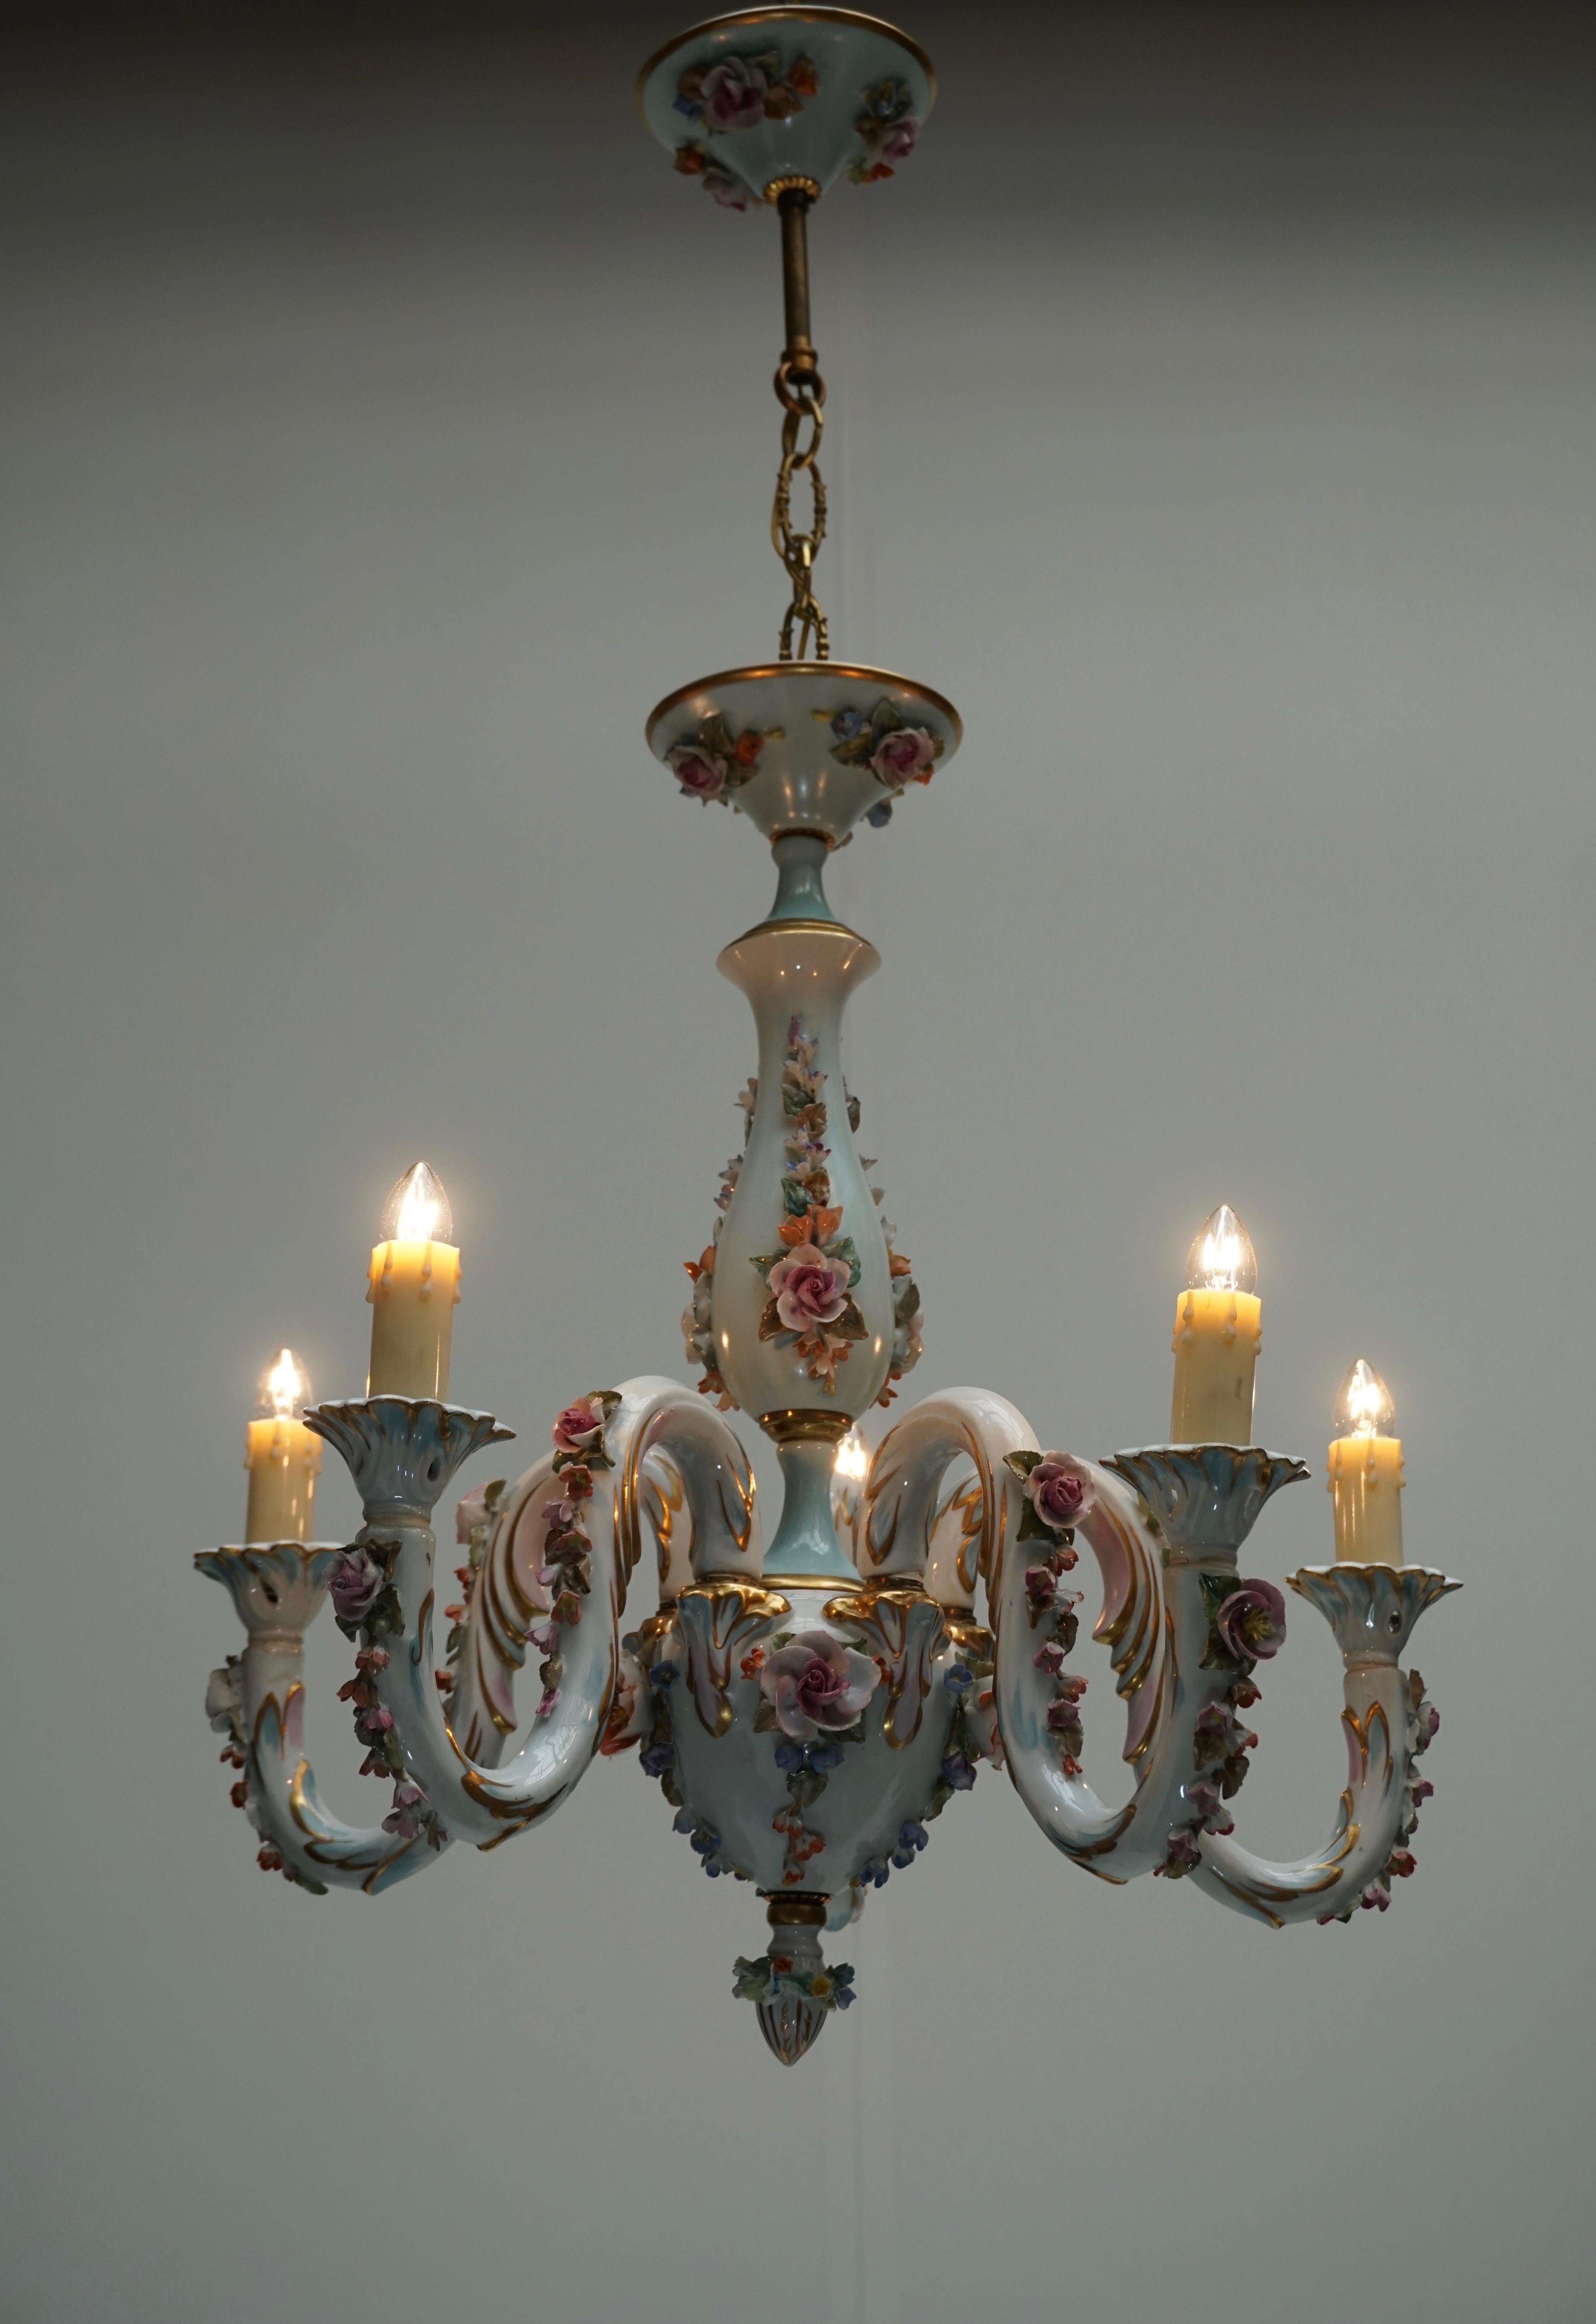 One of a kind magnificent porcelain chandelier exceptional quality crafted by the renowned Italian Capodimonte manufactory. This enchanting five lights porcelain chandelier is fully decorated with hand-painted flowers motif rendered in soft tones